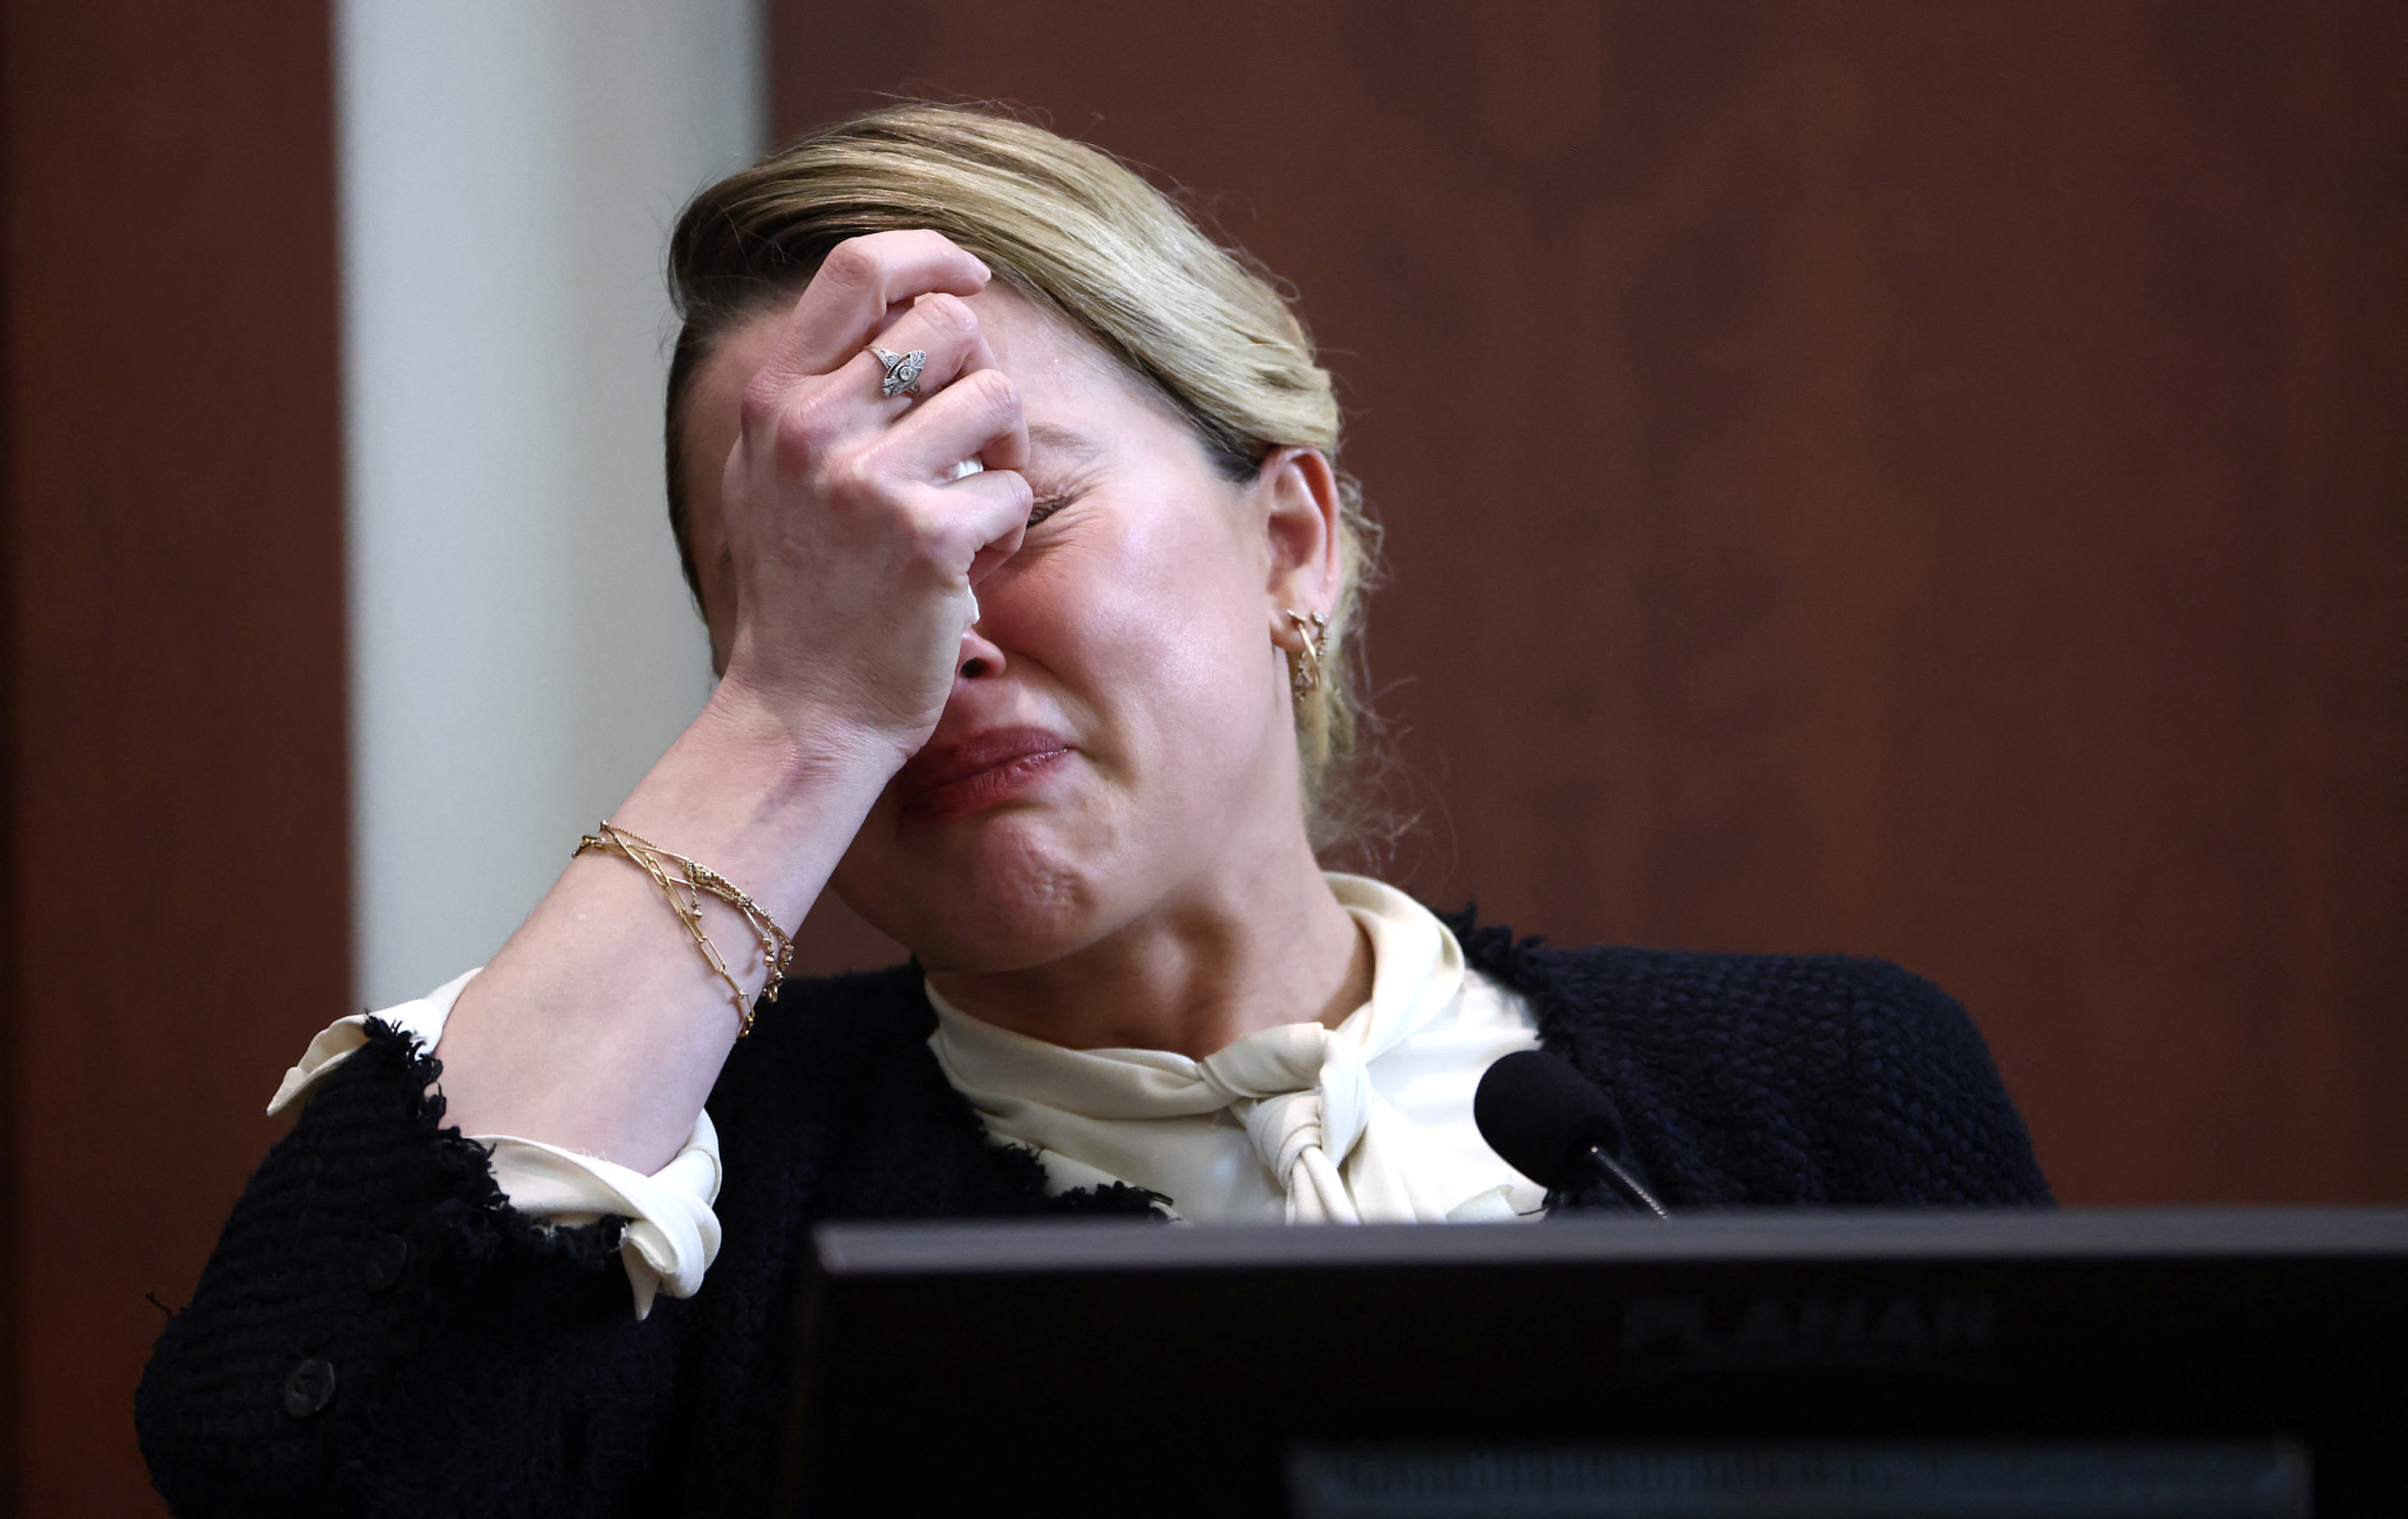 Amber Heard cries on the stand during her testimony (Jim Lo Scalzo/REUTERS)